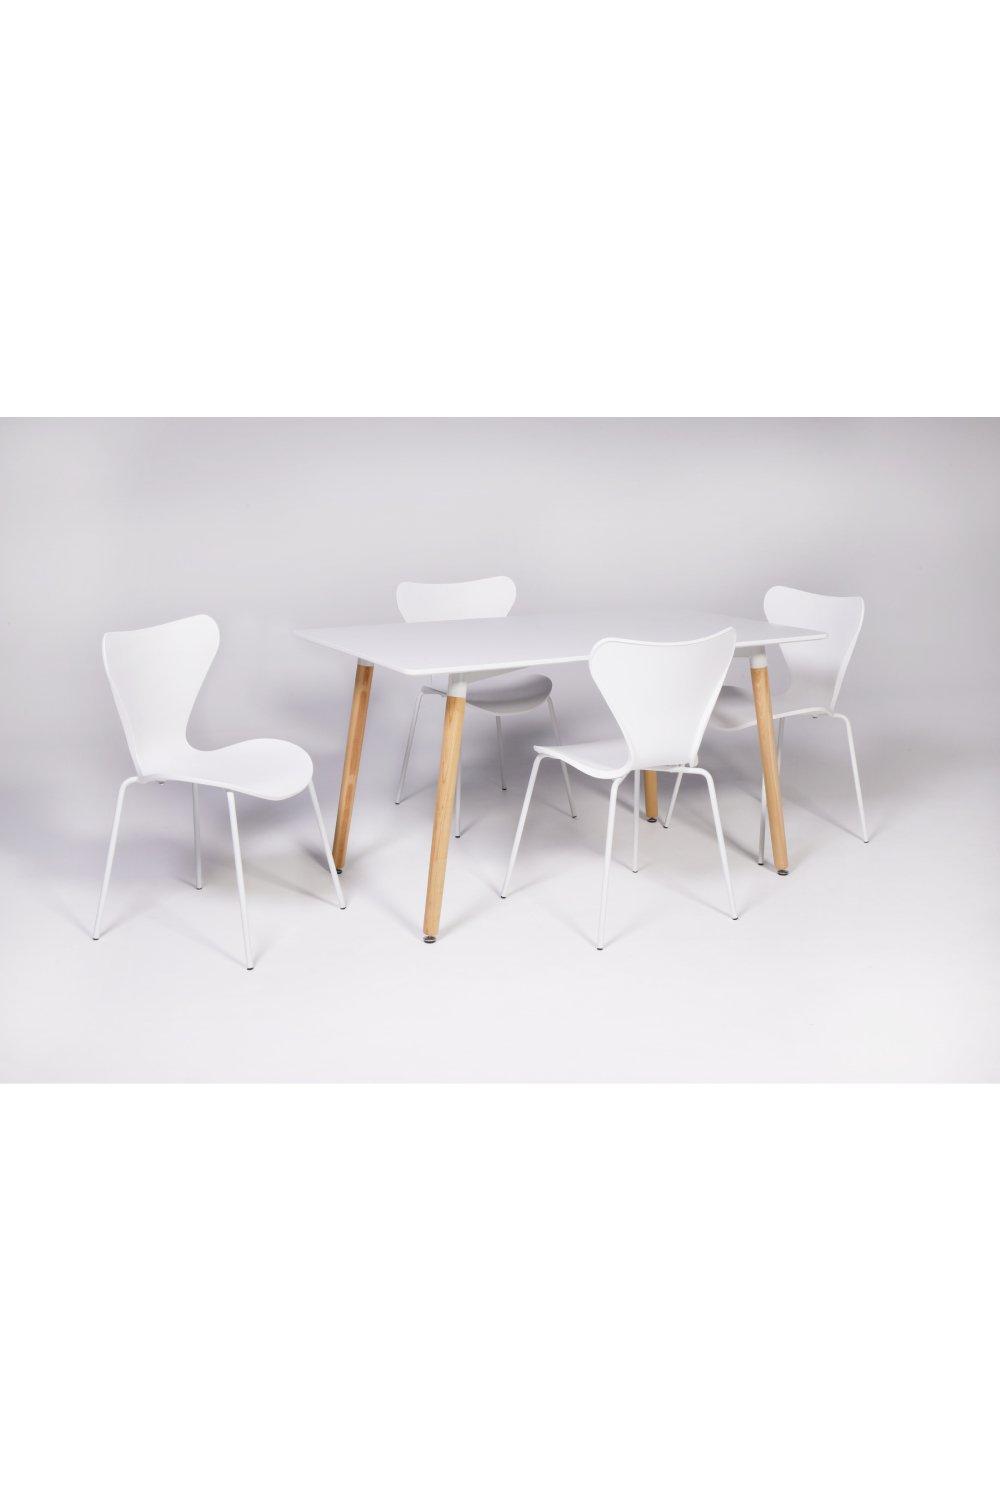 Bailey 140cm Dining Table Set with 4 Fleur Chairs in White